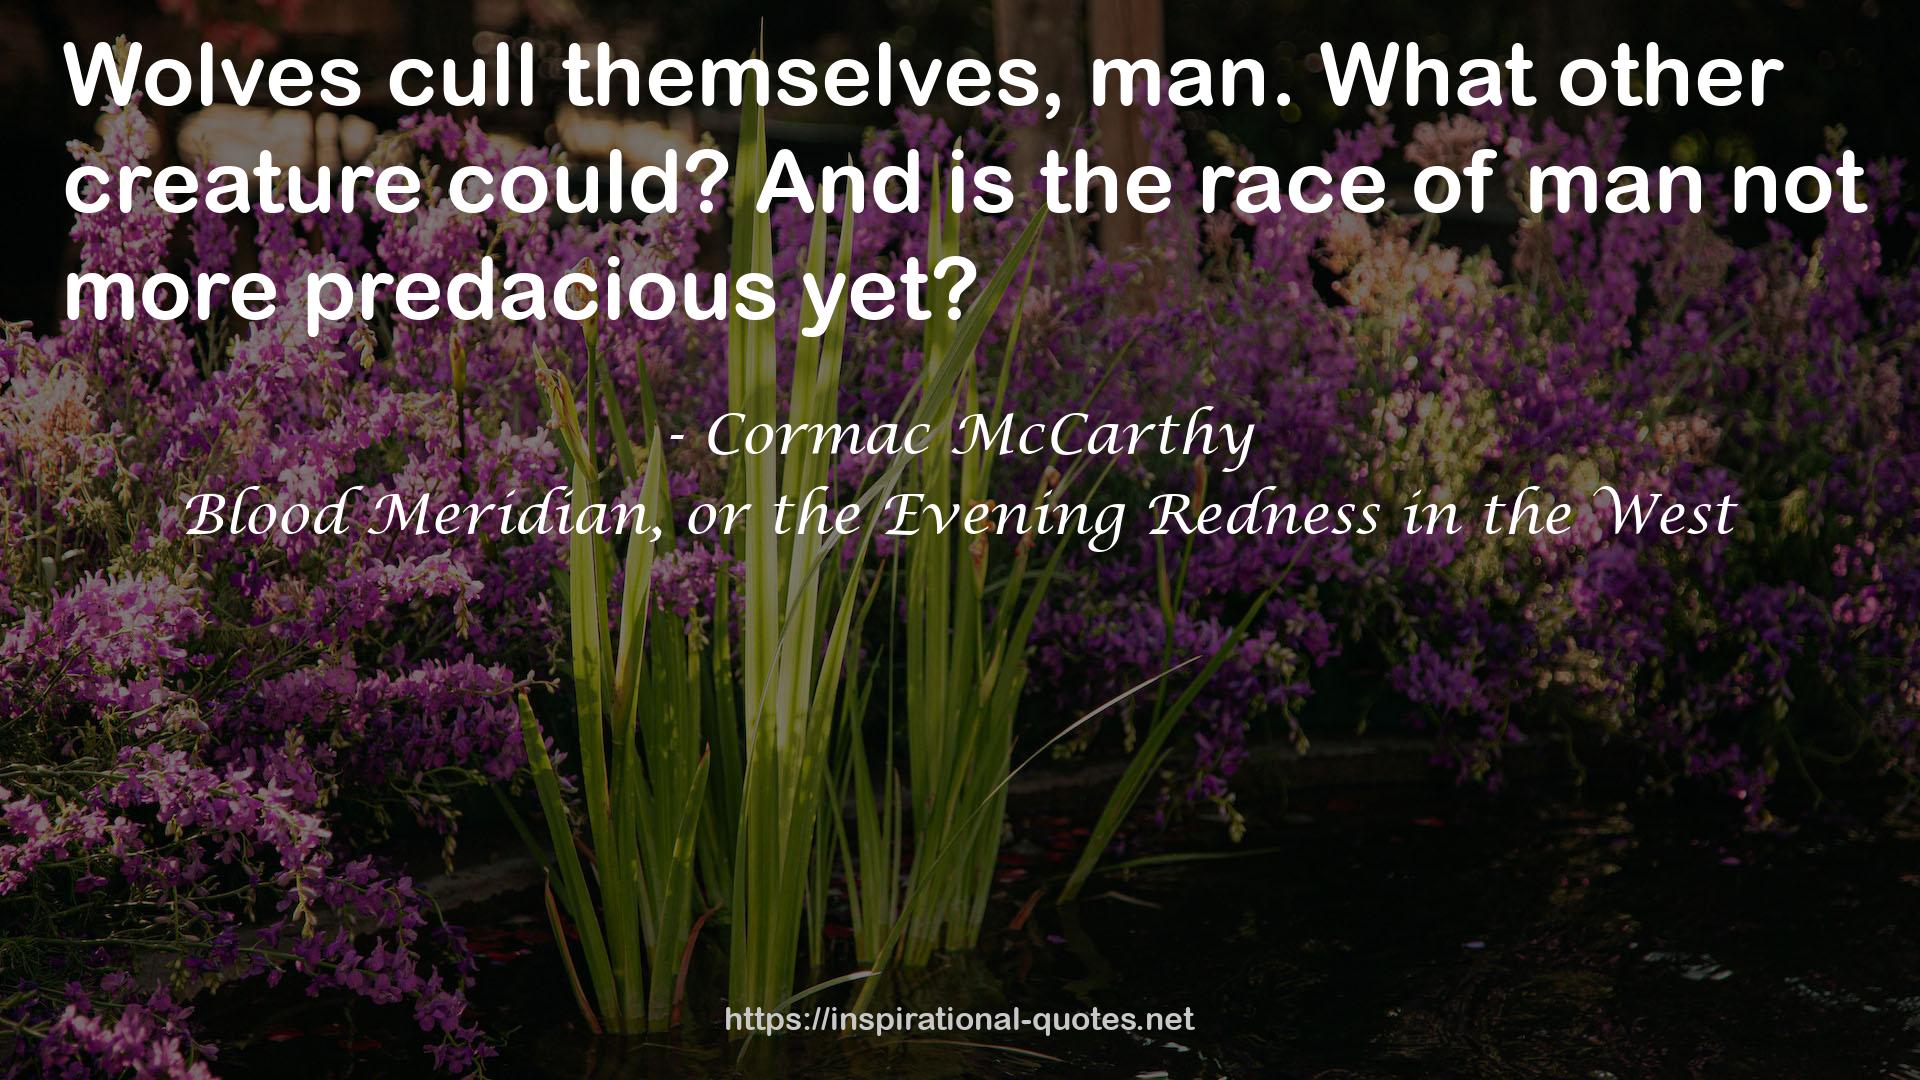 Blood Meridian, or the Evening Redness in the West QUOTES